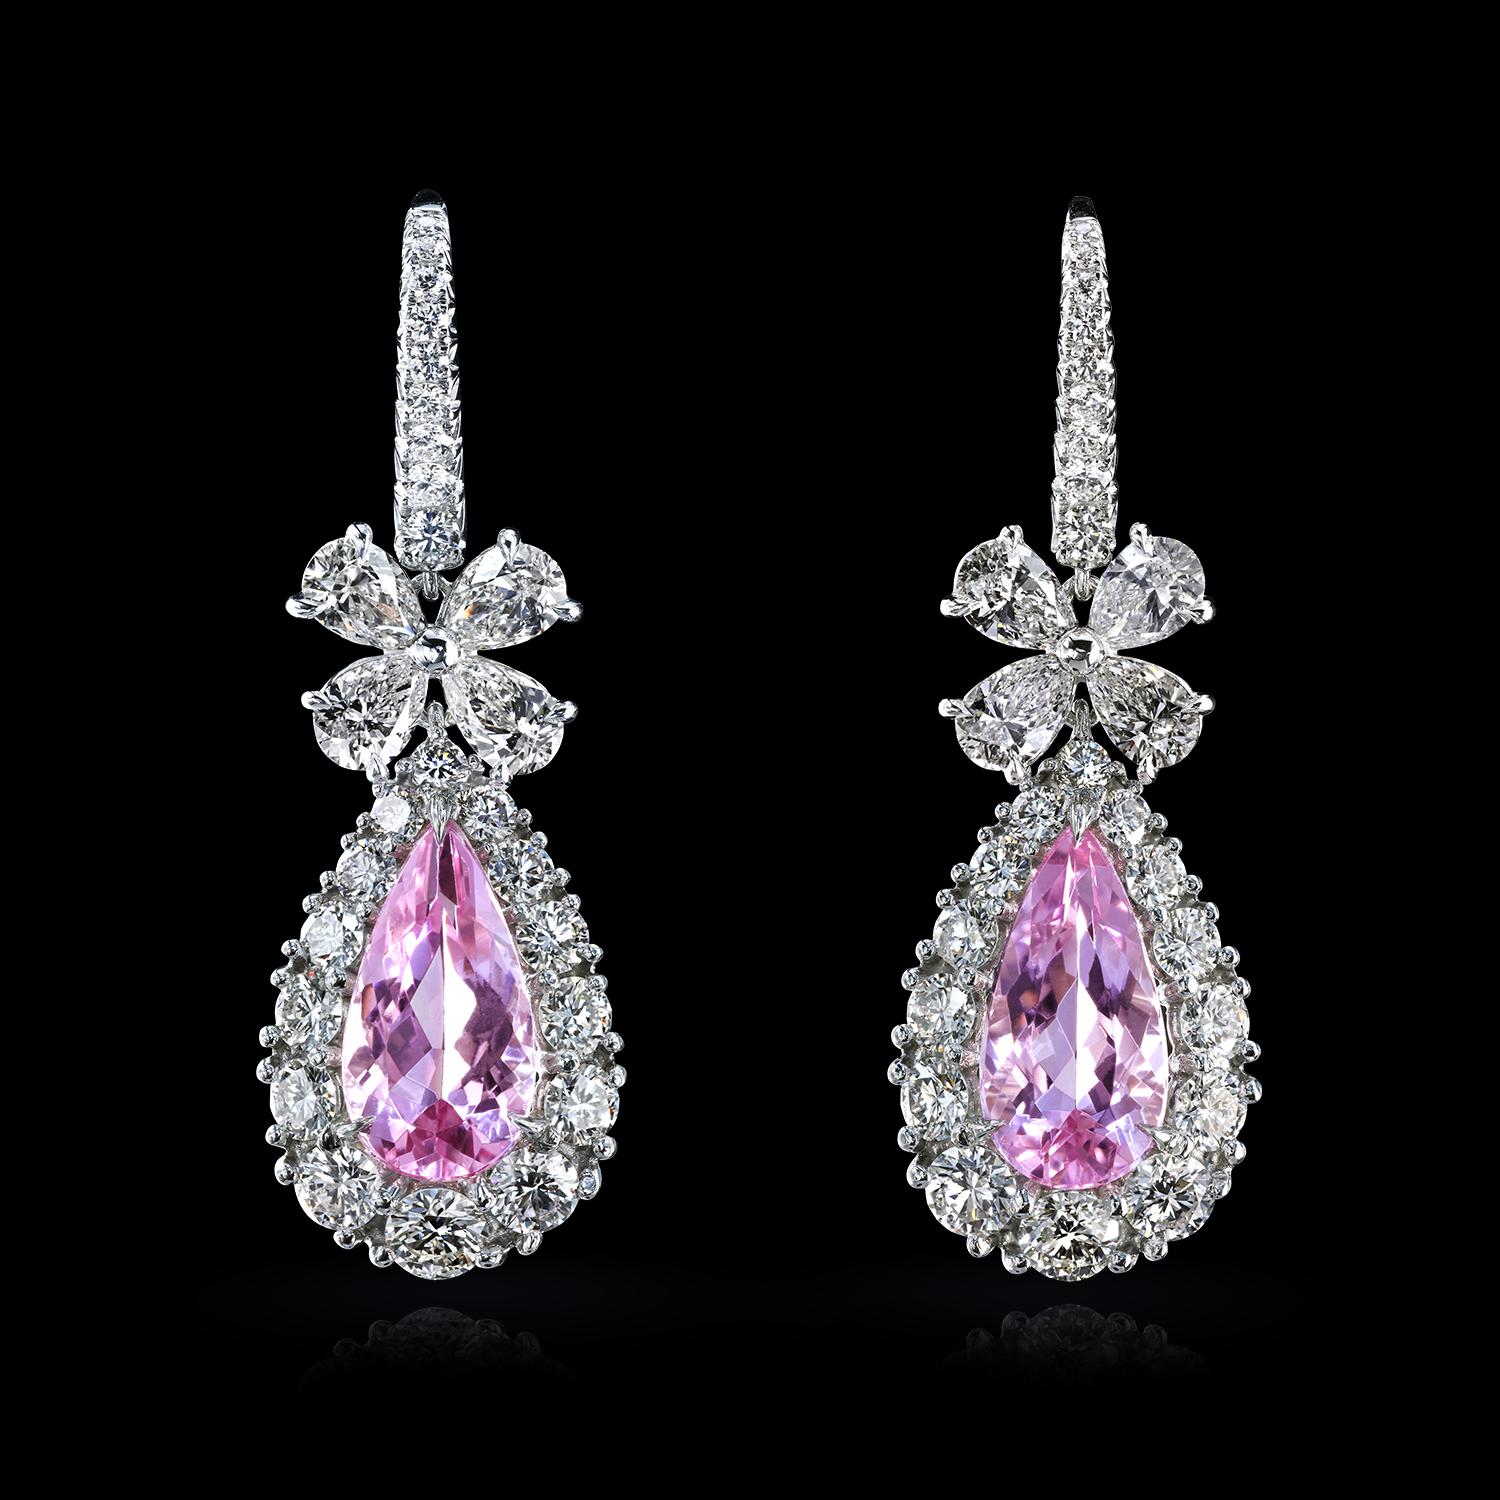 Fabulous platinum drop earrings feature pink emeralds - natural morganites just under two carats, each embedded in graduated diamond clusters. The pear-shaped pendants, diamond bows, and pave-studded French wires are connected with flexible hinges